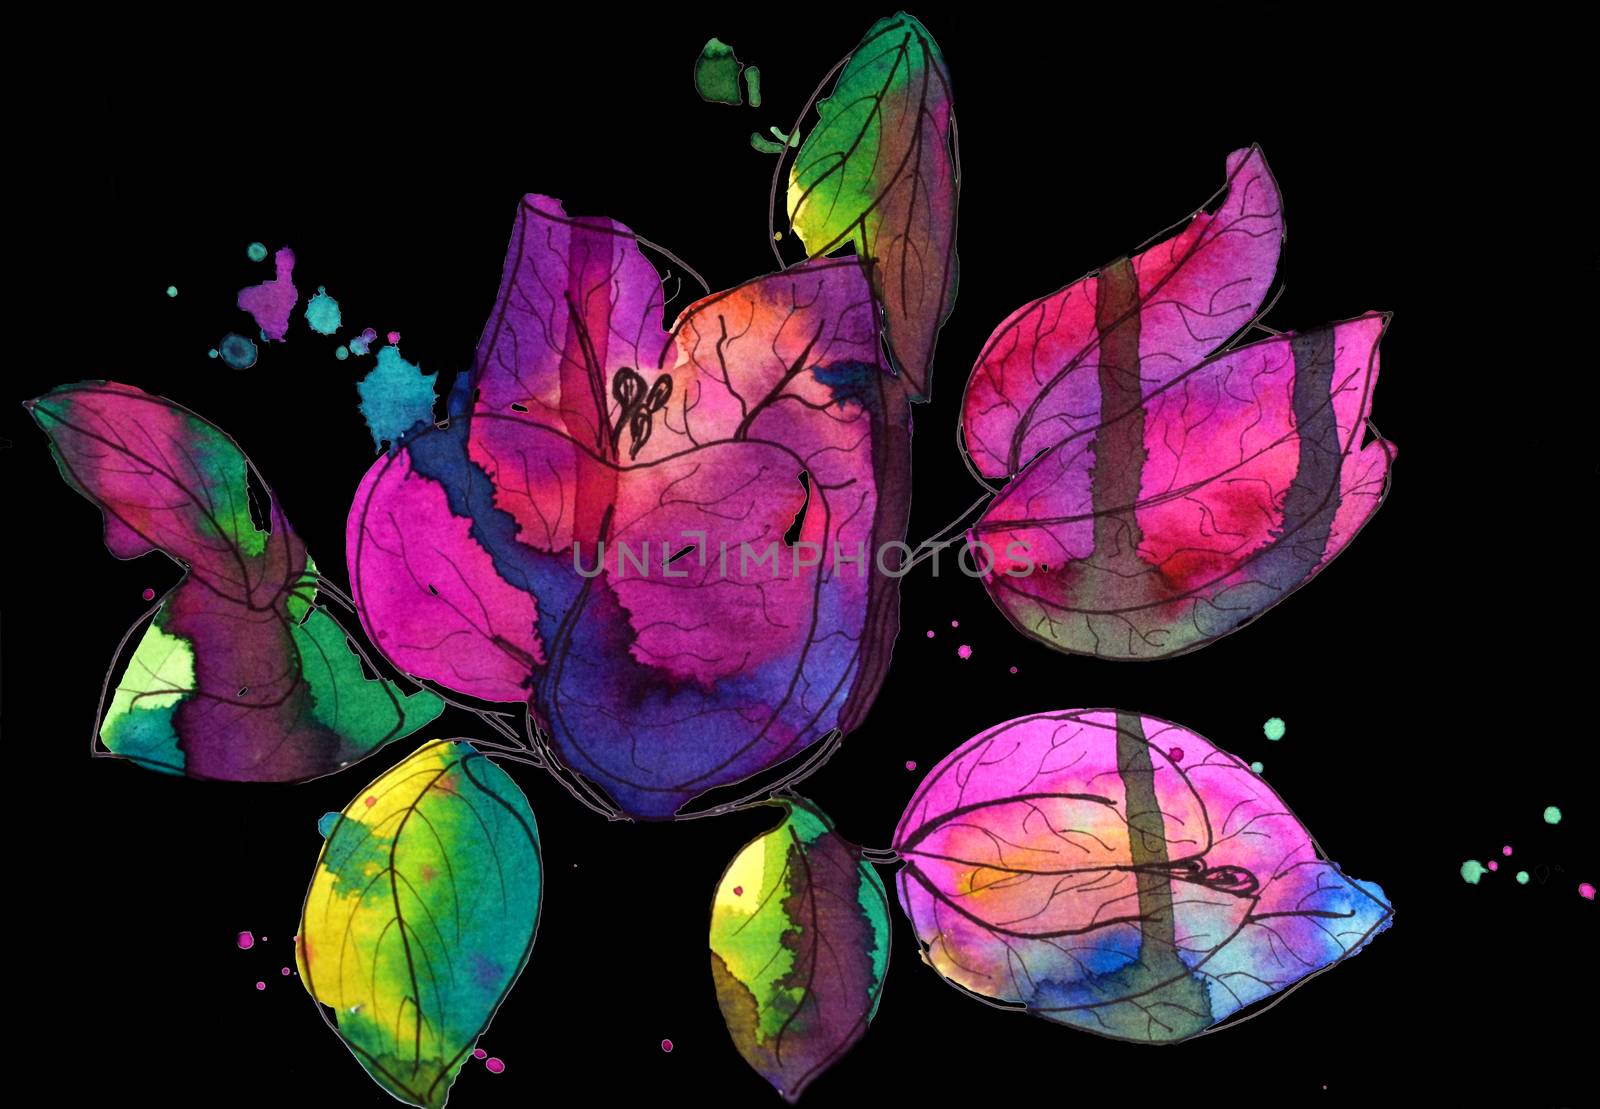 Illustration of blossom pink bougainvillea paper flower with stains. Watercolor painting retouch on black background